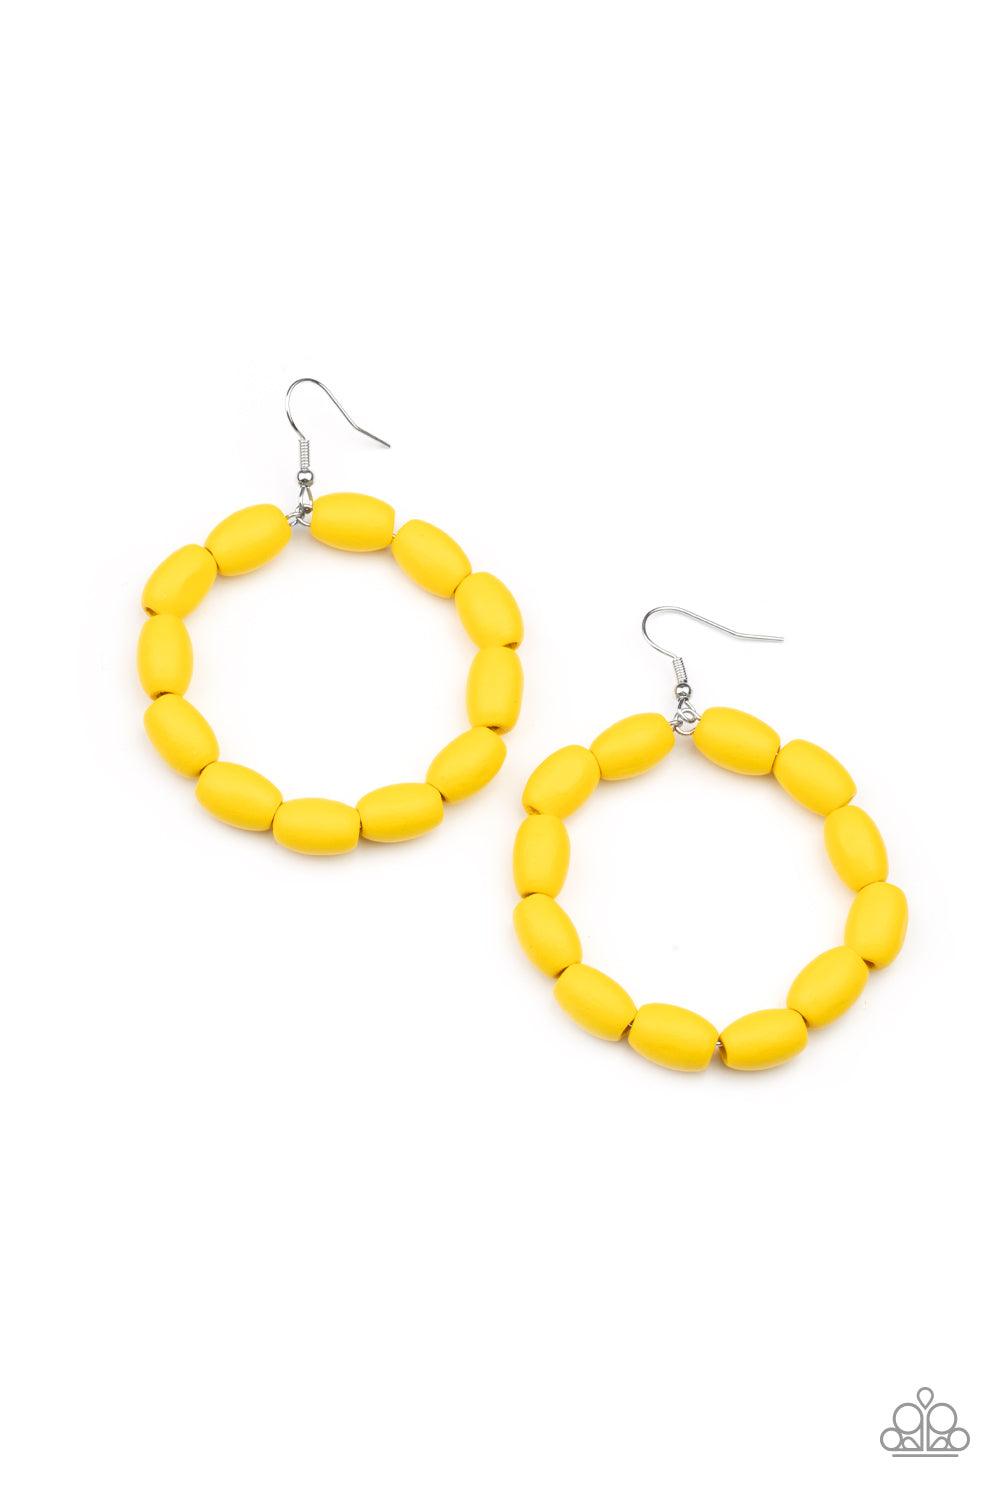 Paparazzi Accessories Living The WOOD Life - Yellow Chunky Illuminating wooden beads are threaded along a dainty wire, creating an earthy hoop. Earring attaches to a standard fishhook fitting. Sold as one pair of earrings. Jewelry